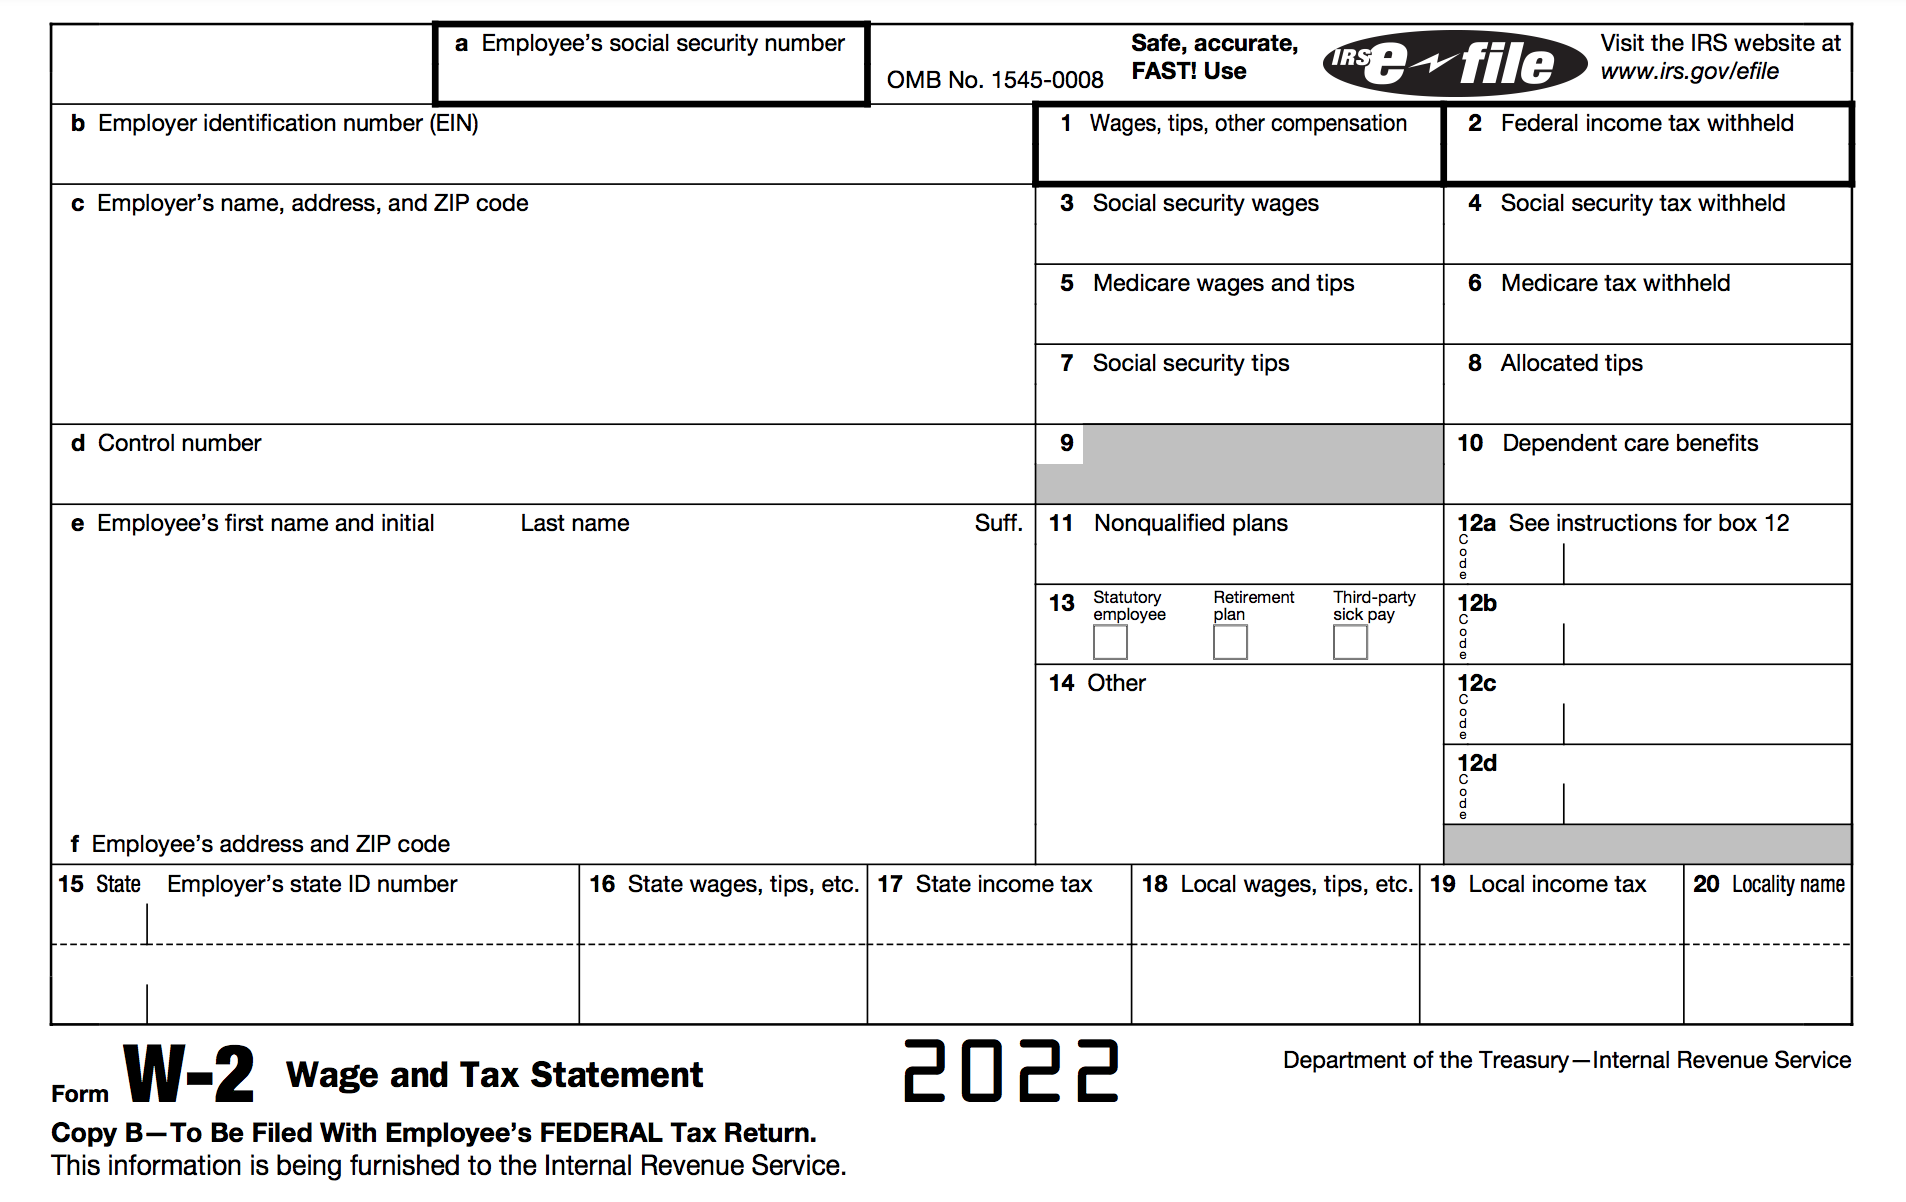 How To Fill Out A W-2 Tax Form | Smartasset in How To Fill Out A W2 Form As An Employer